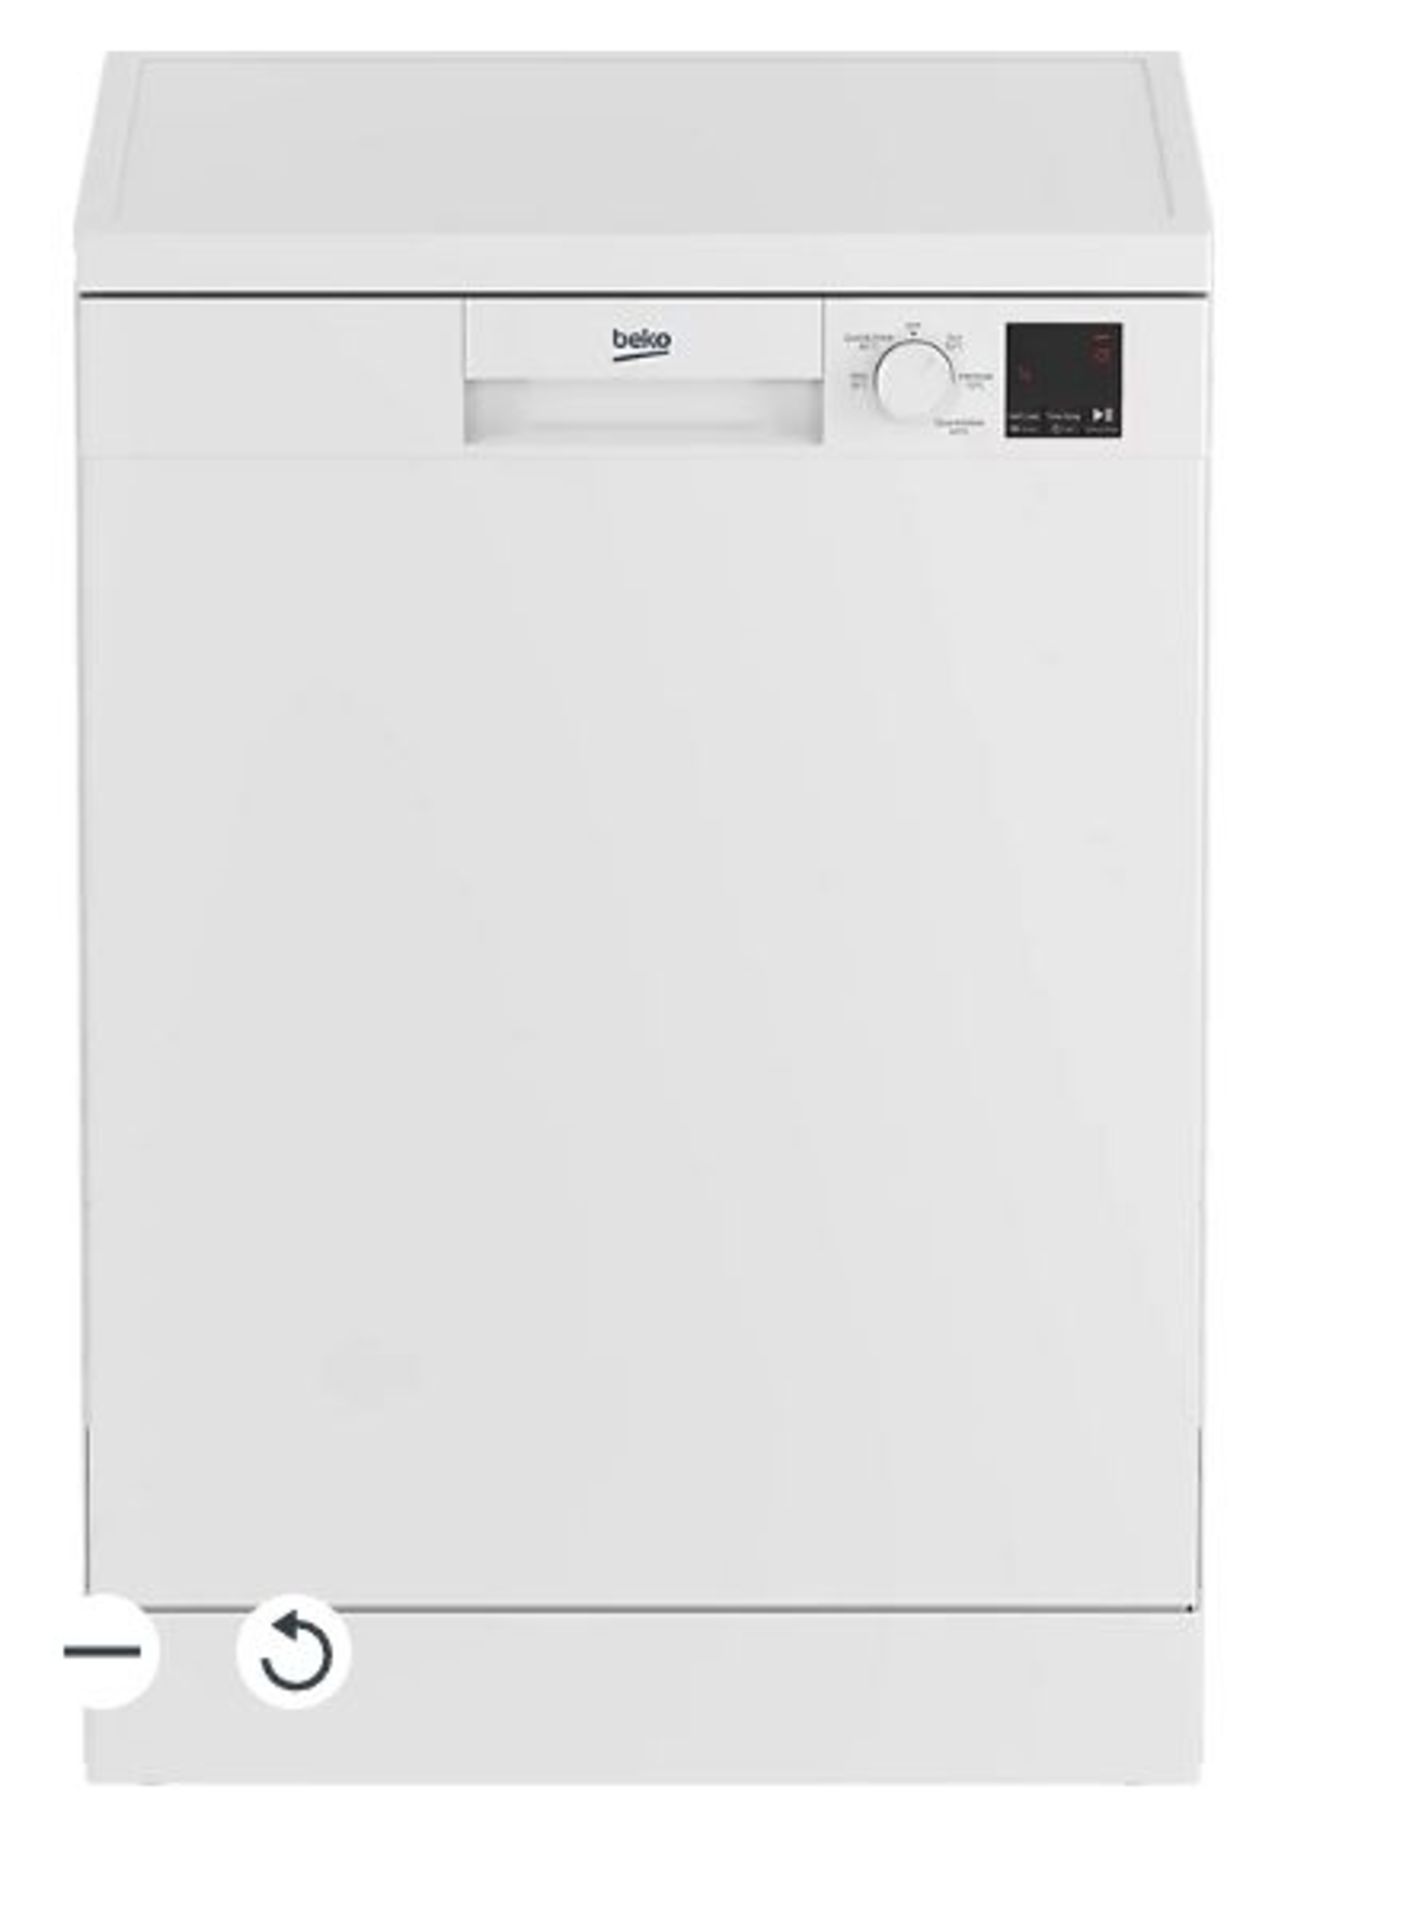 Beko DFN05Q10W Freestanding Full size Dishwasher - White. - S2. RRP £419.00. Easy to use, this